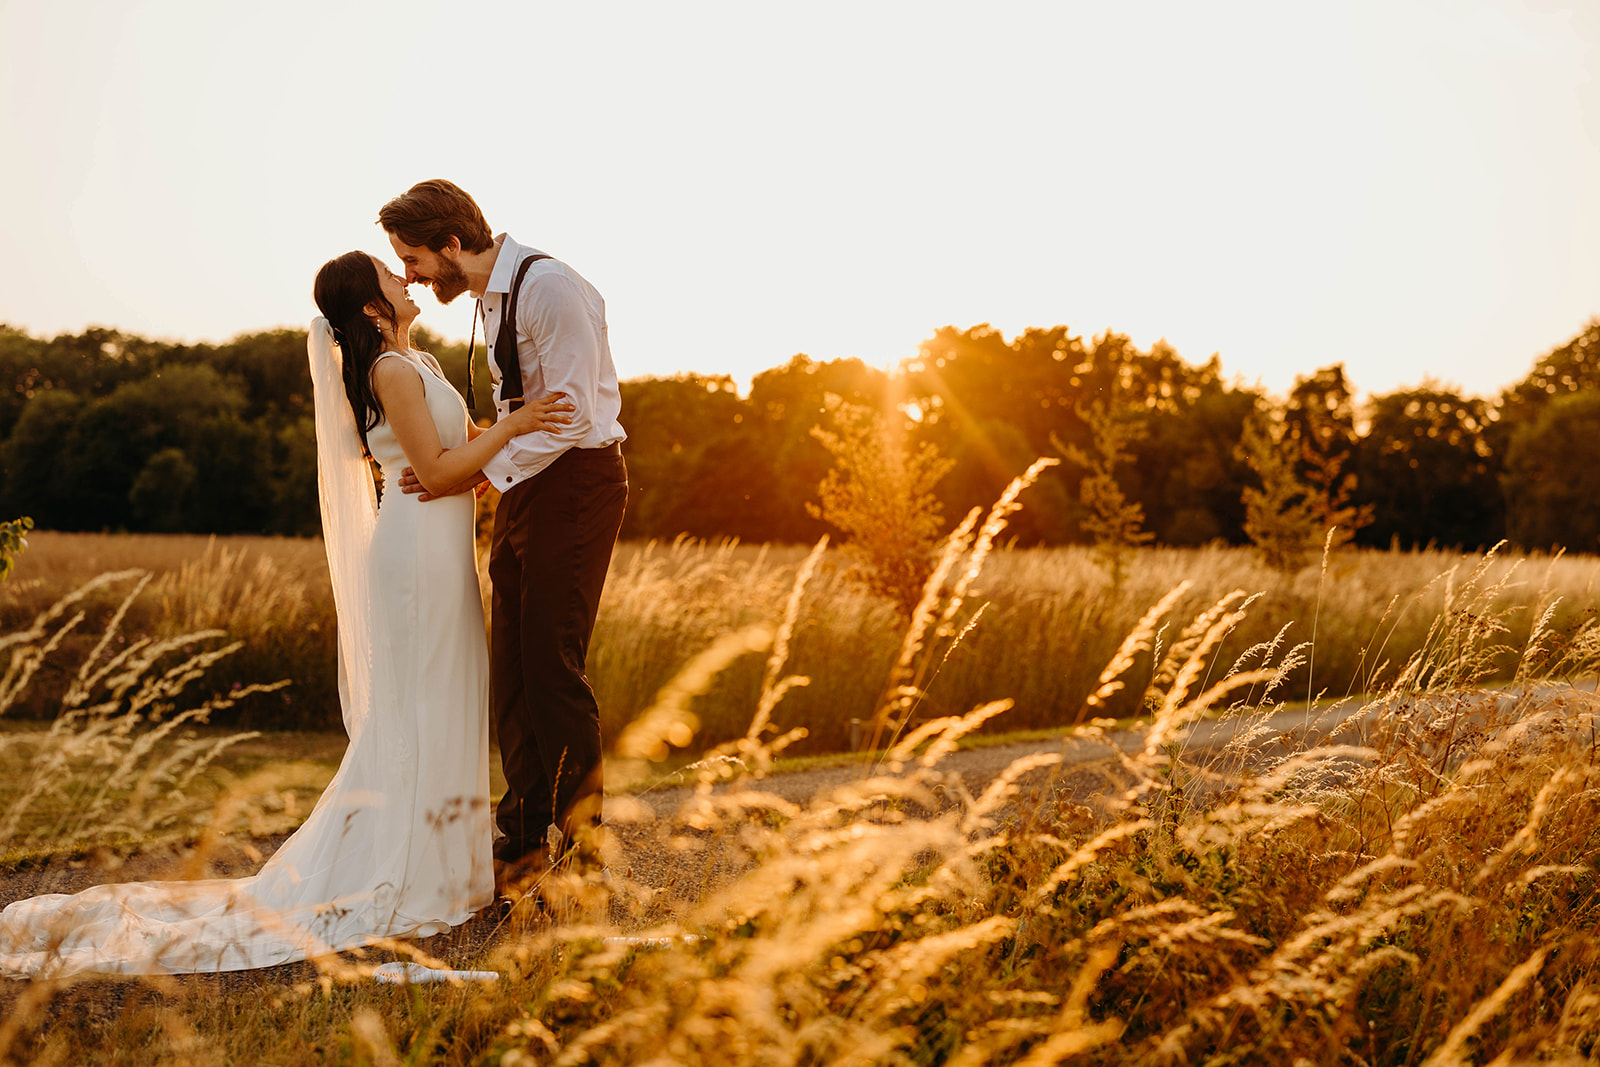 Sunset photographs of bride and groom with tall grass in foreground